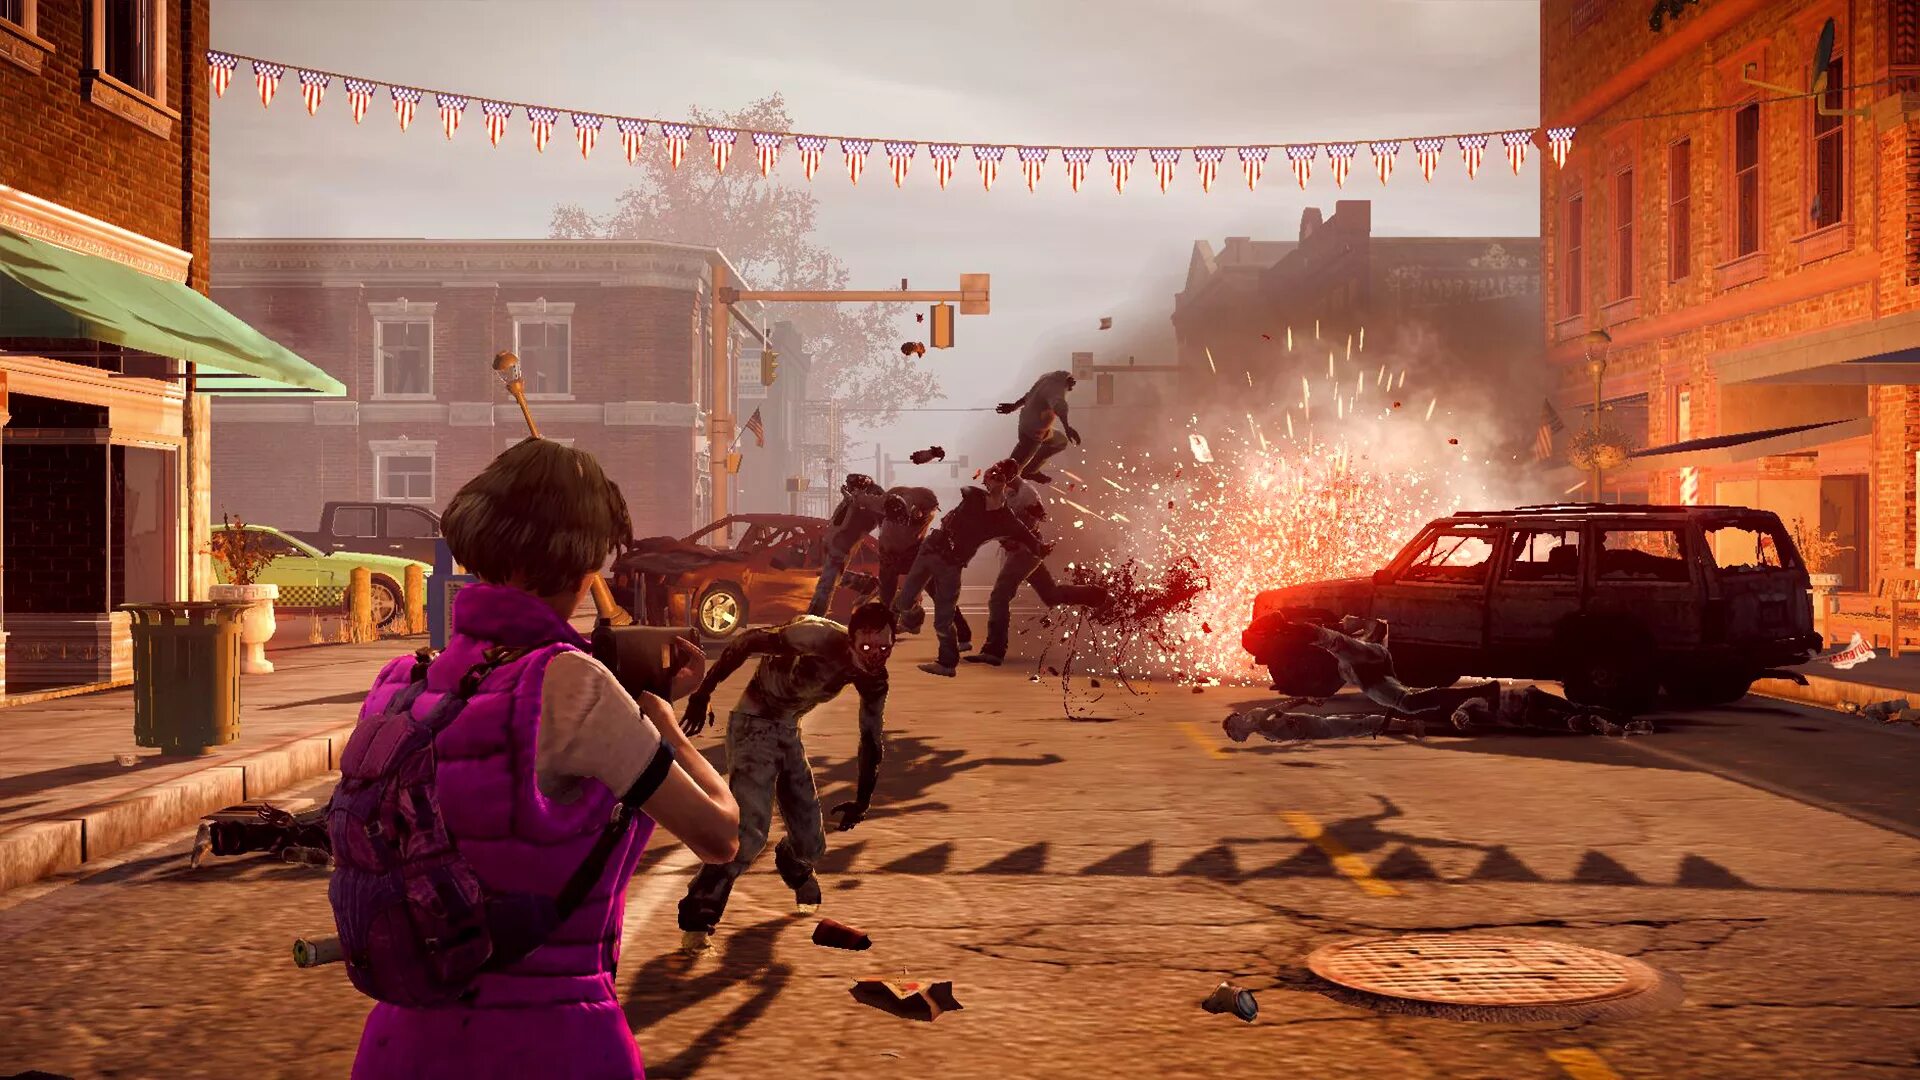 Топ игр на пк апокалипсис. State of Decay 2. State of Decay 1. Игра State of Decay. Игра State of Decay 3.